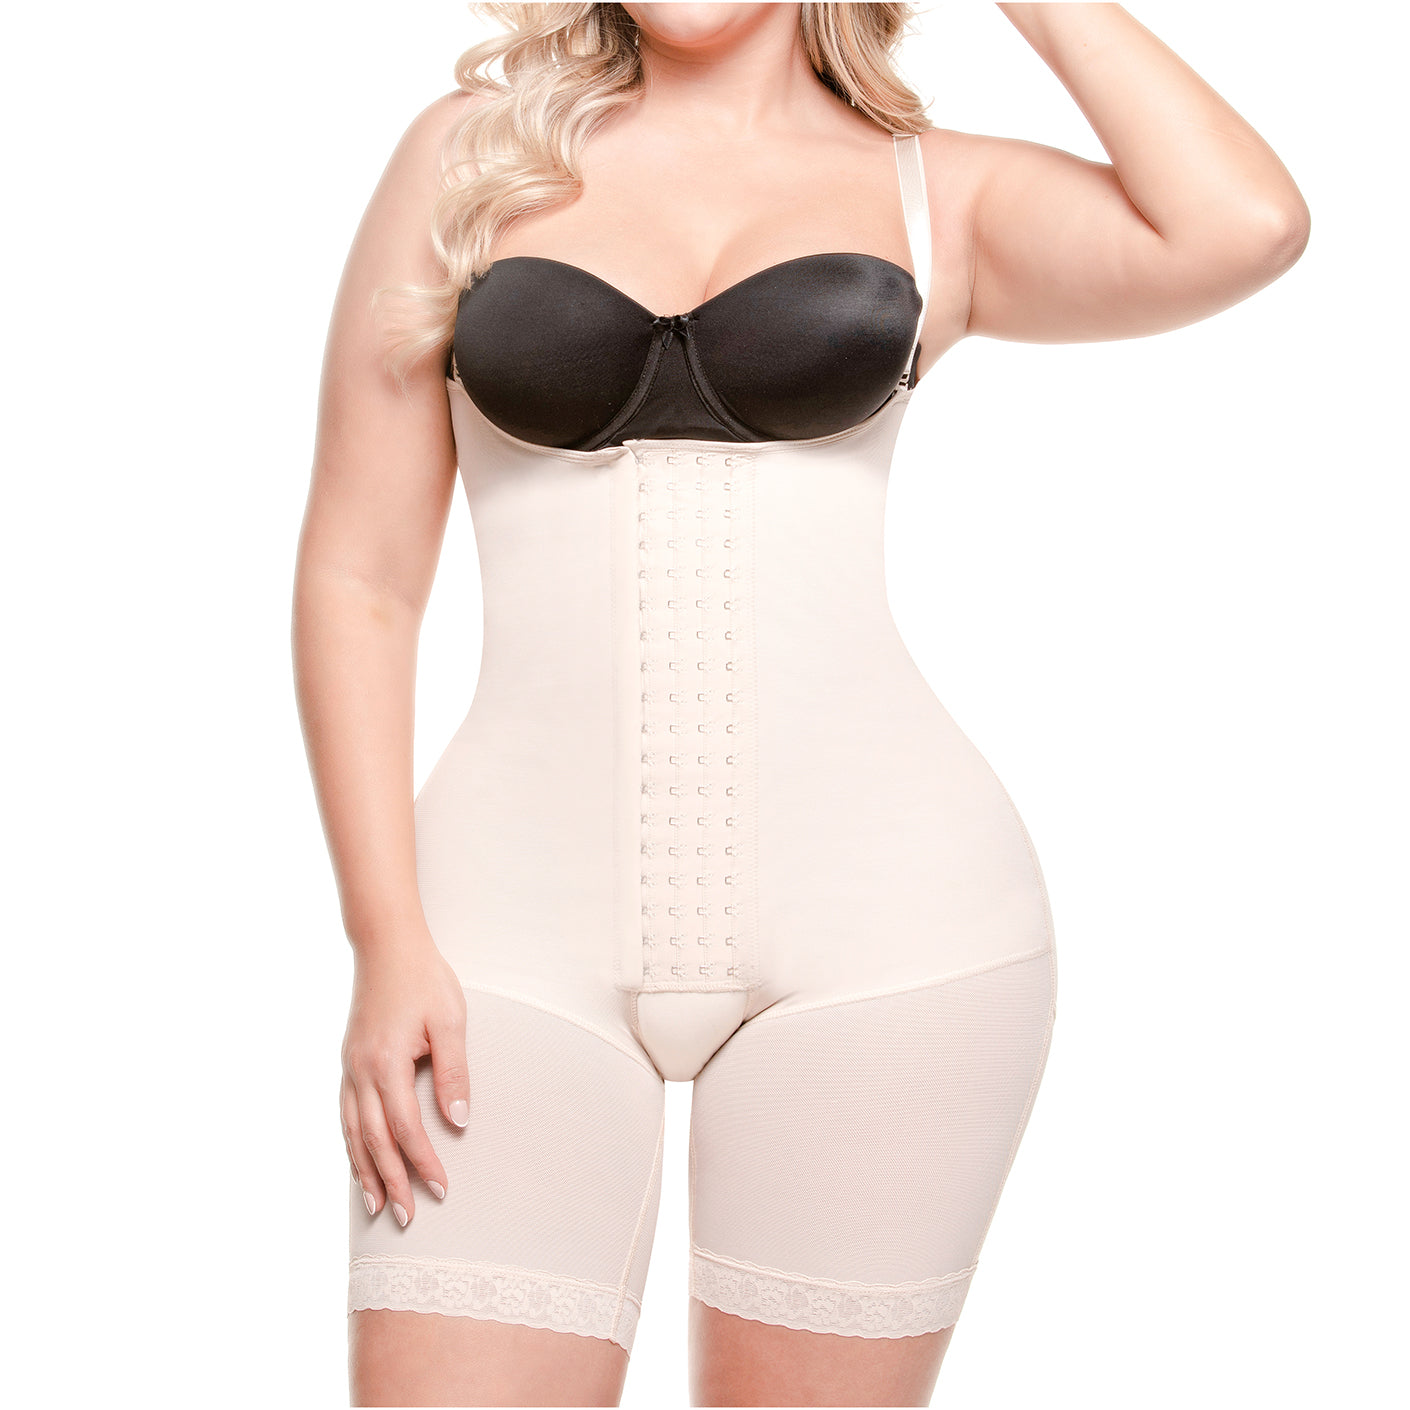 Get the Perfect Shape with Our BBL Shapewear Collection – Shapes Secrets  Fajas